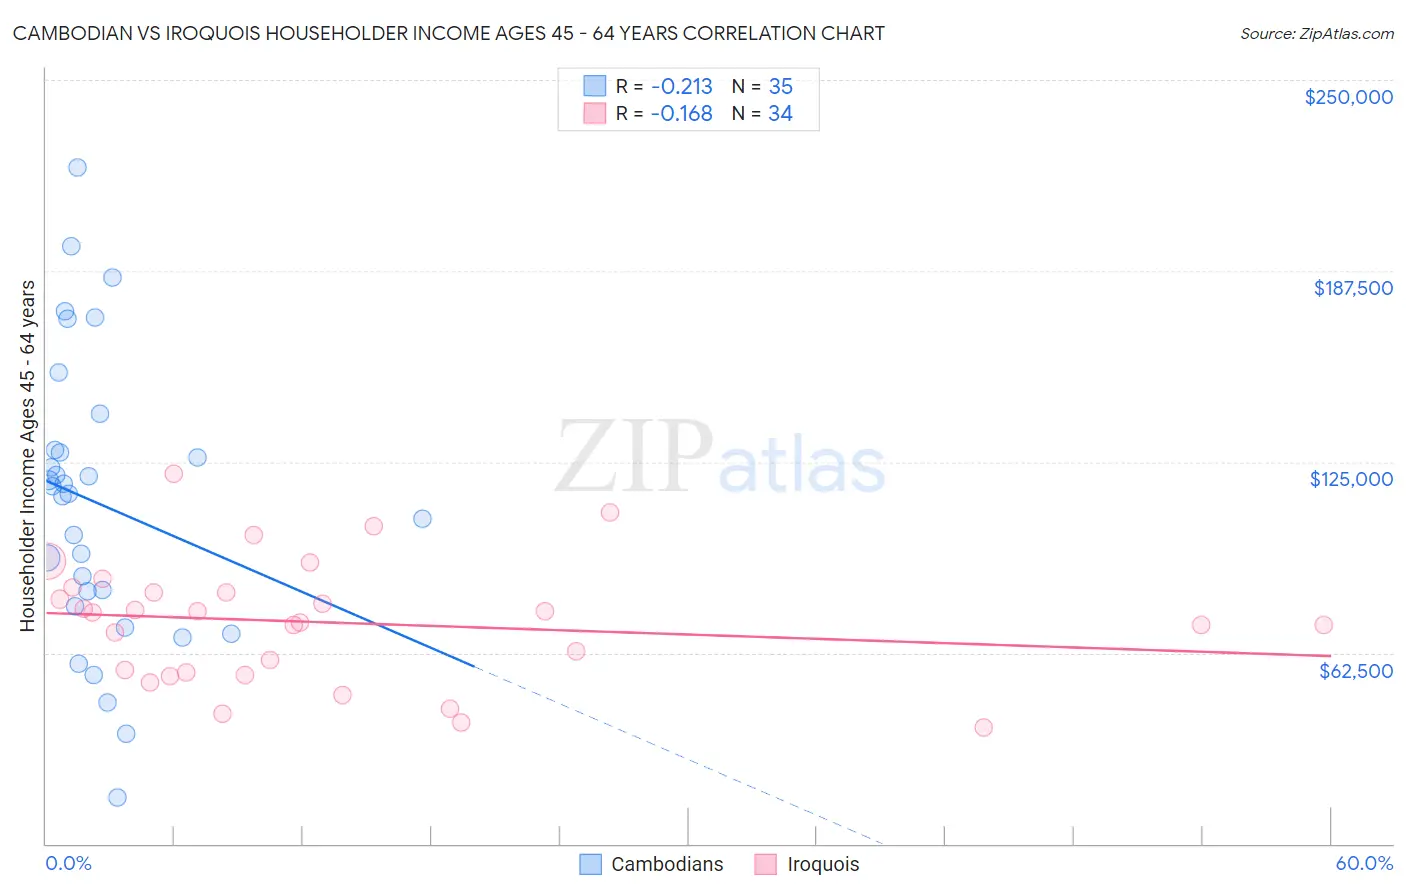 Cambodian vs Iroquois Householder Income Ages 45 - 64 years